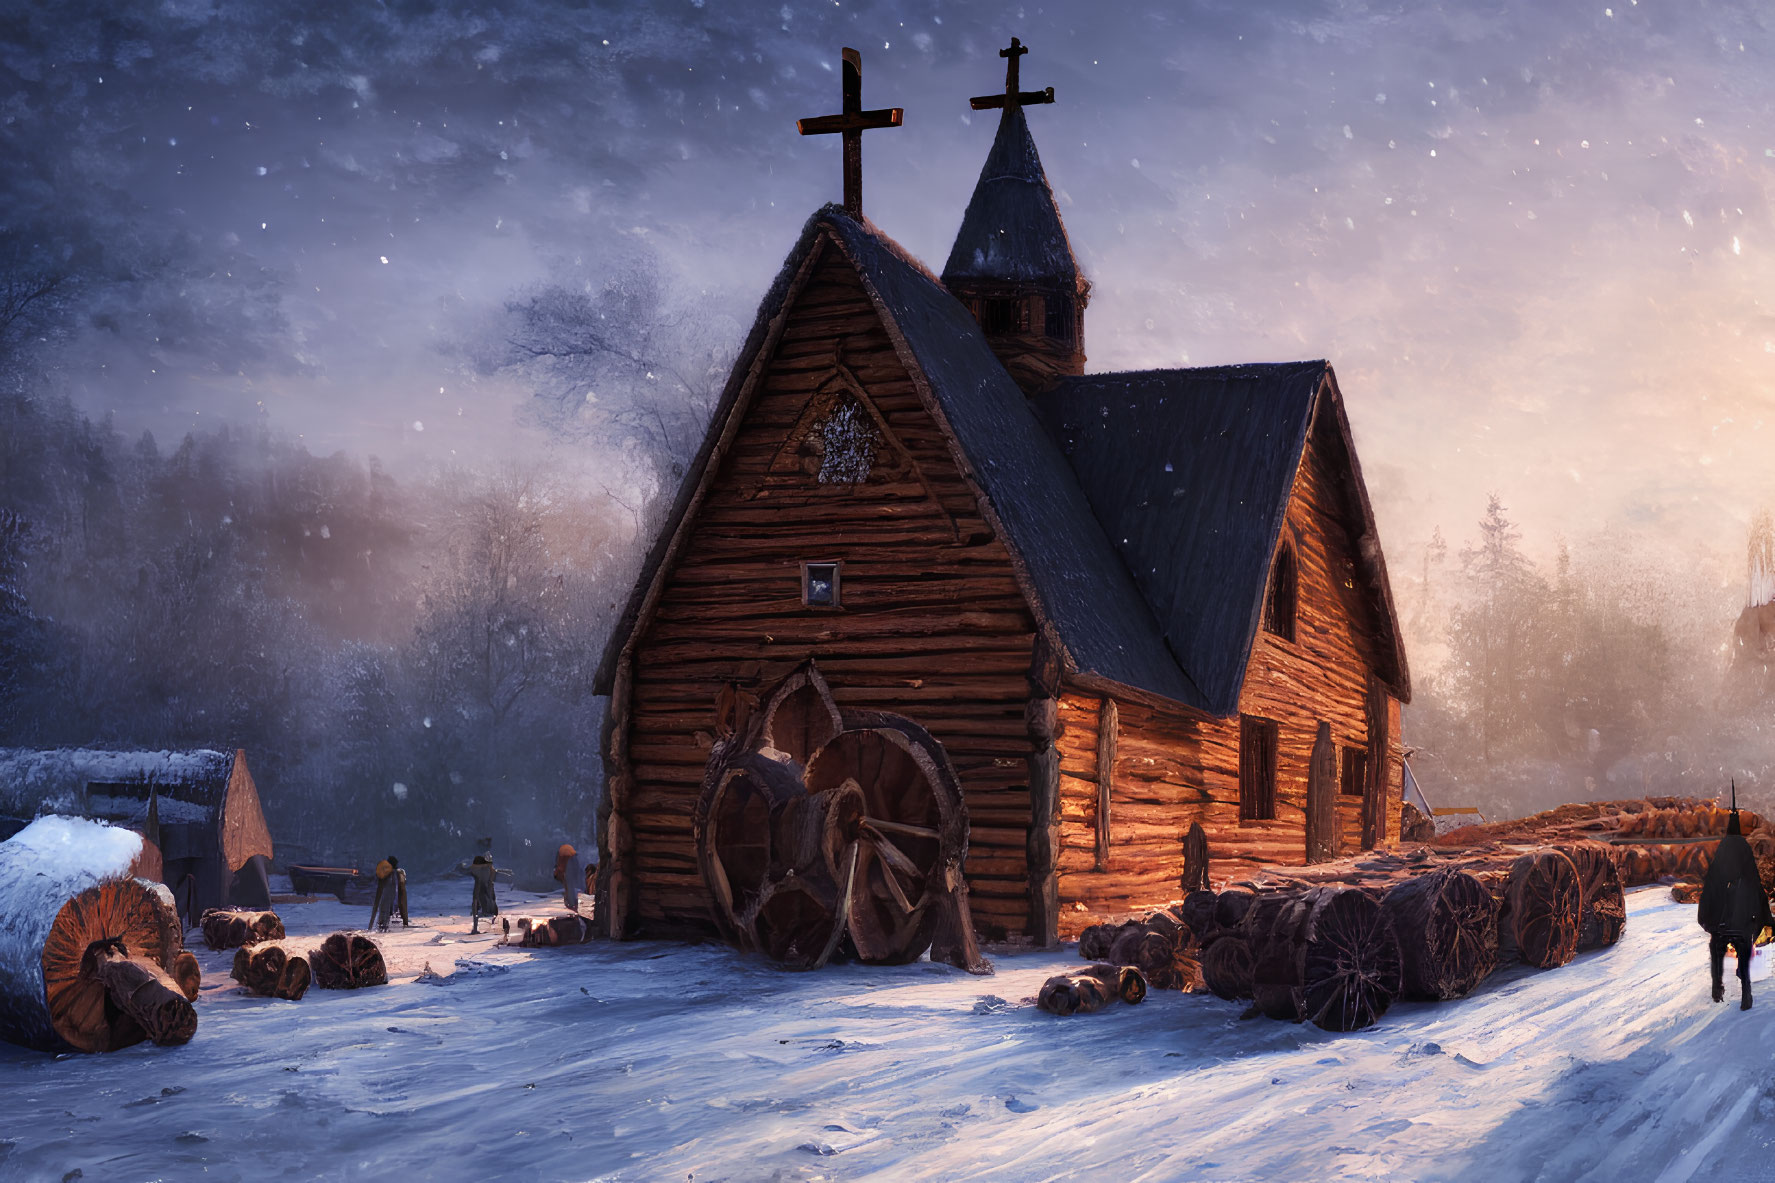 Winter church scene with large wheel, person, and logs at twilight